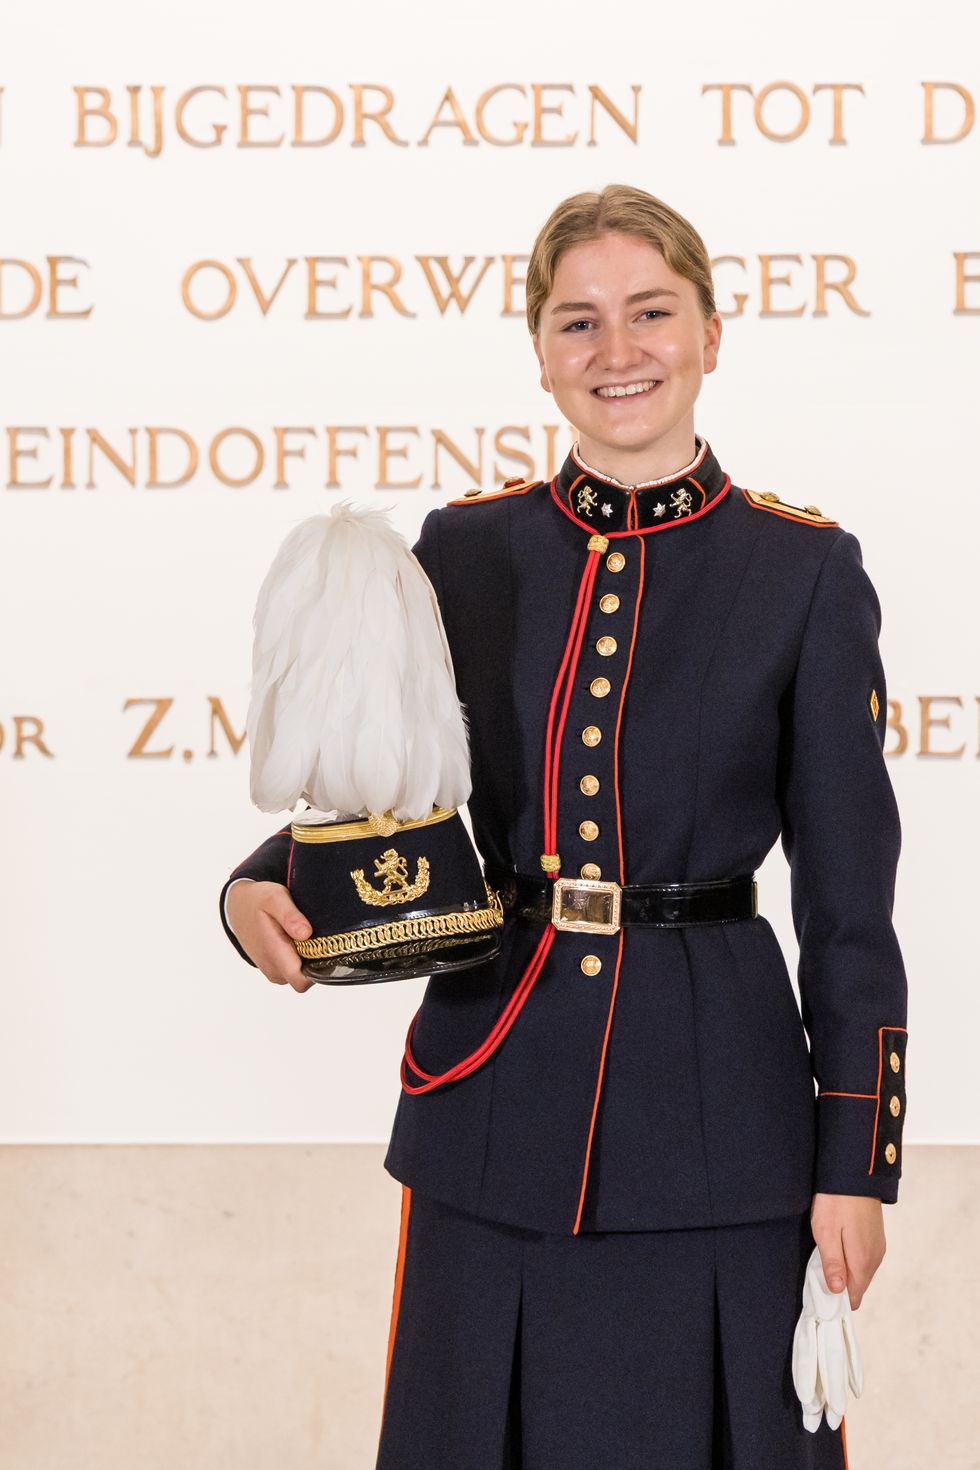 her royal highness princess elisabeth of belgium attends the sworn ceremony at the royal military academy